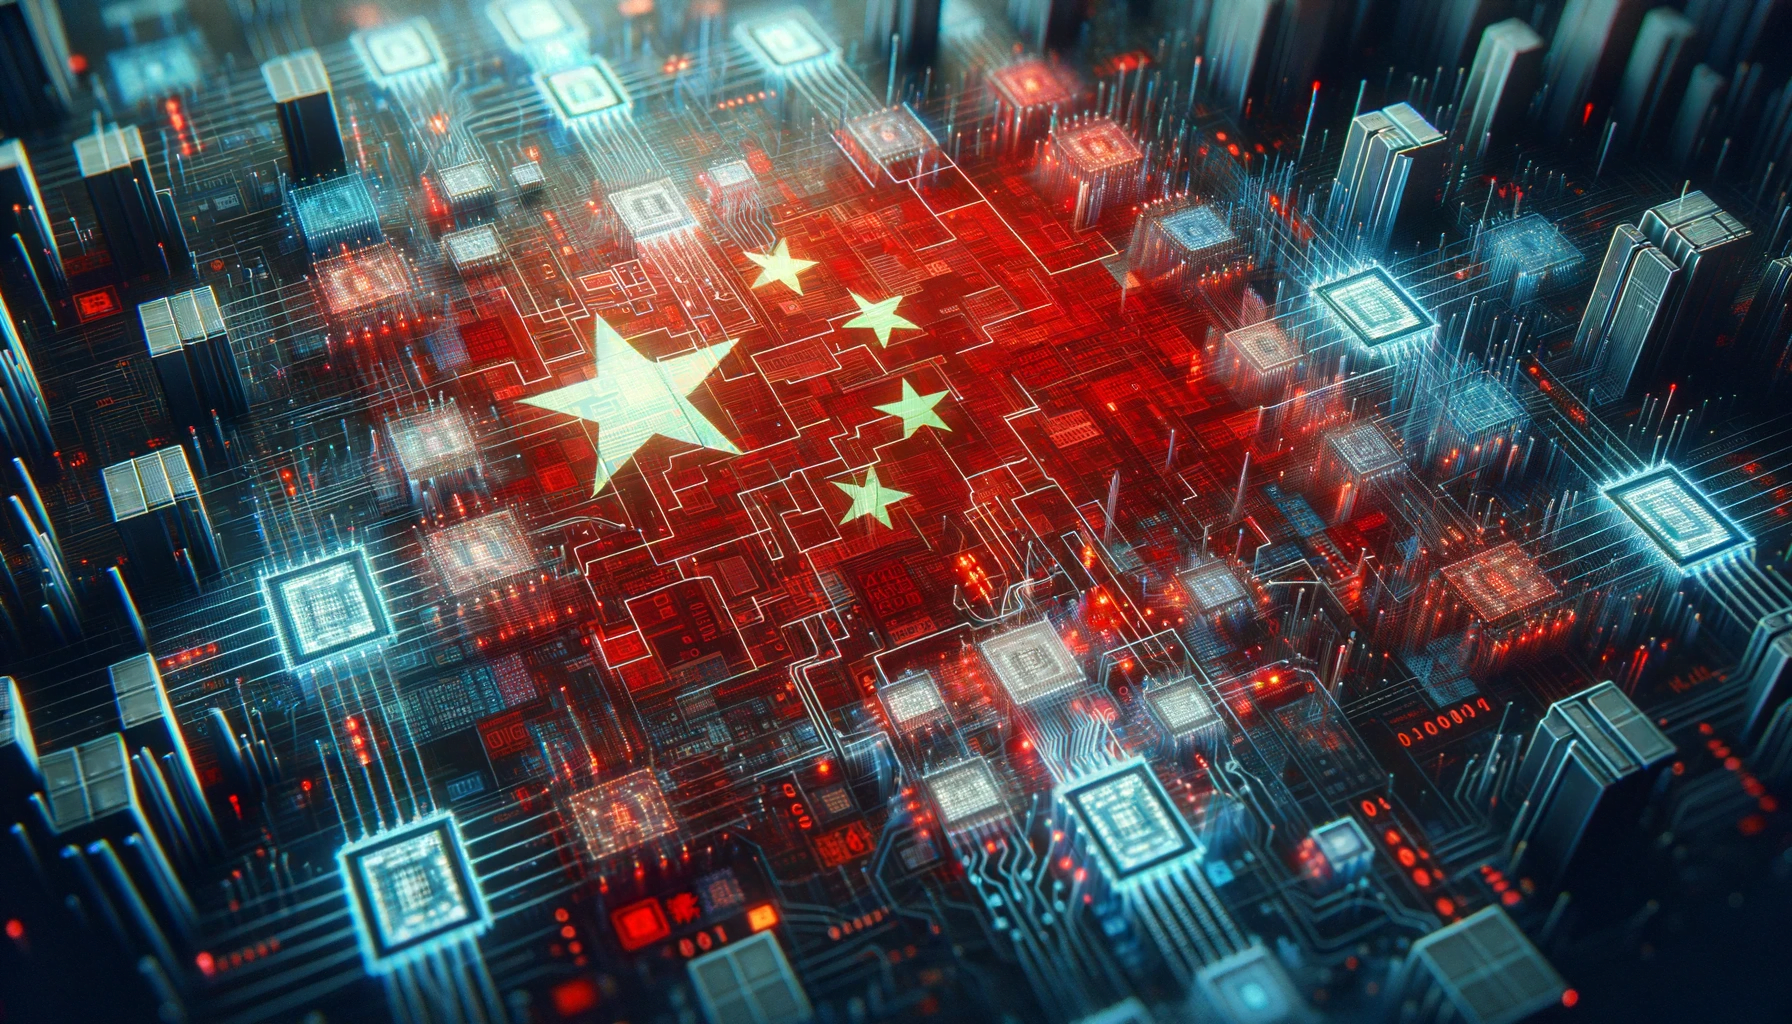 China's race to dominate AI may be hindered by its censorship agenda